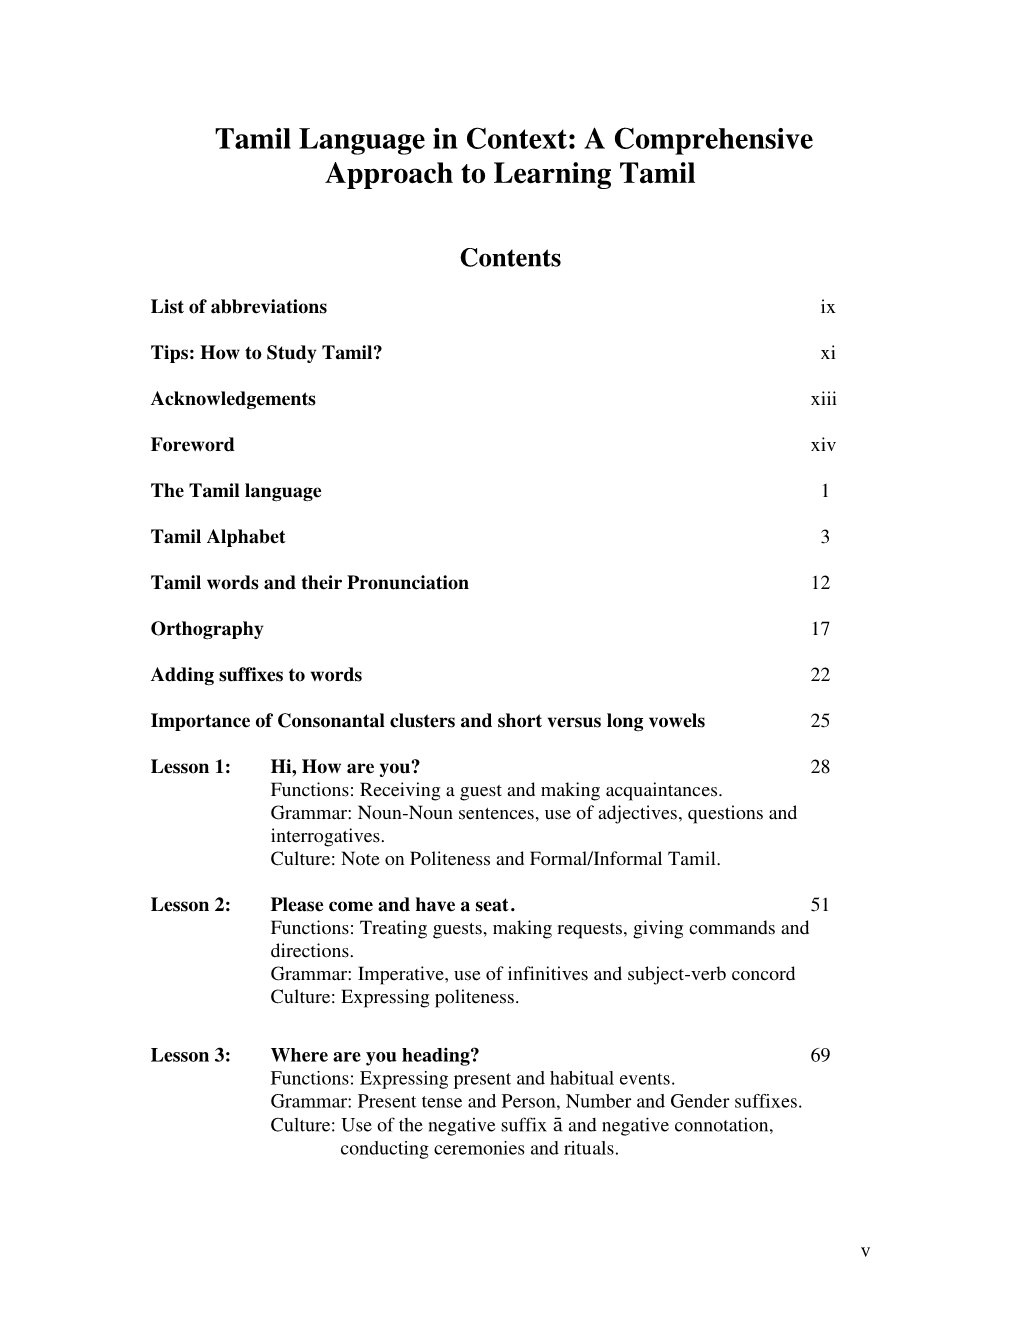 A Comprehensive Approach to Learning Tamil